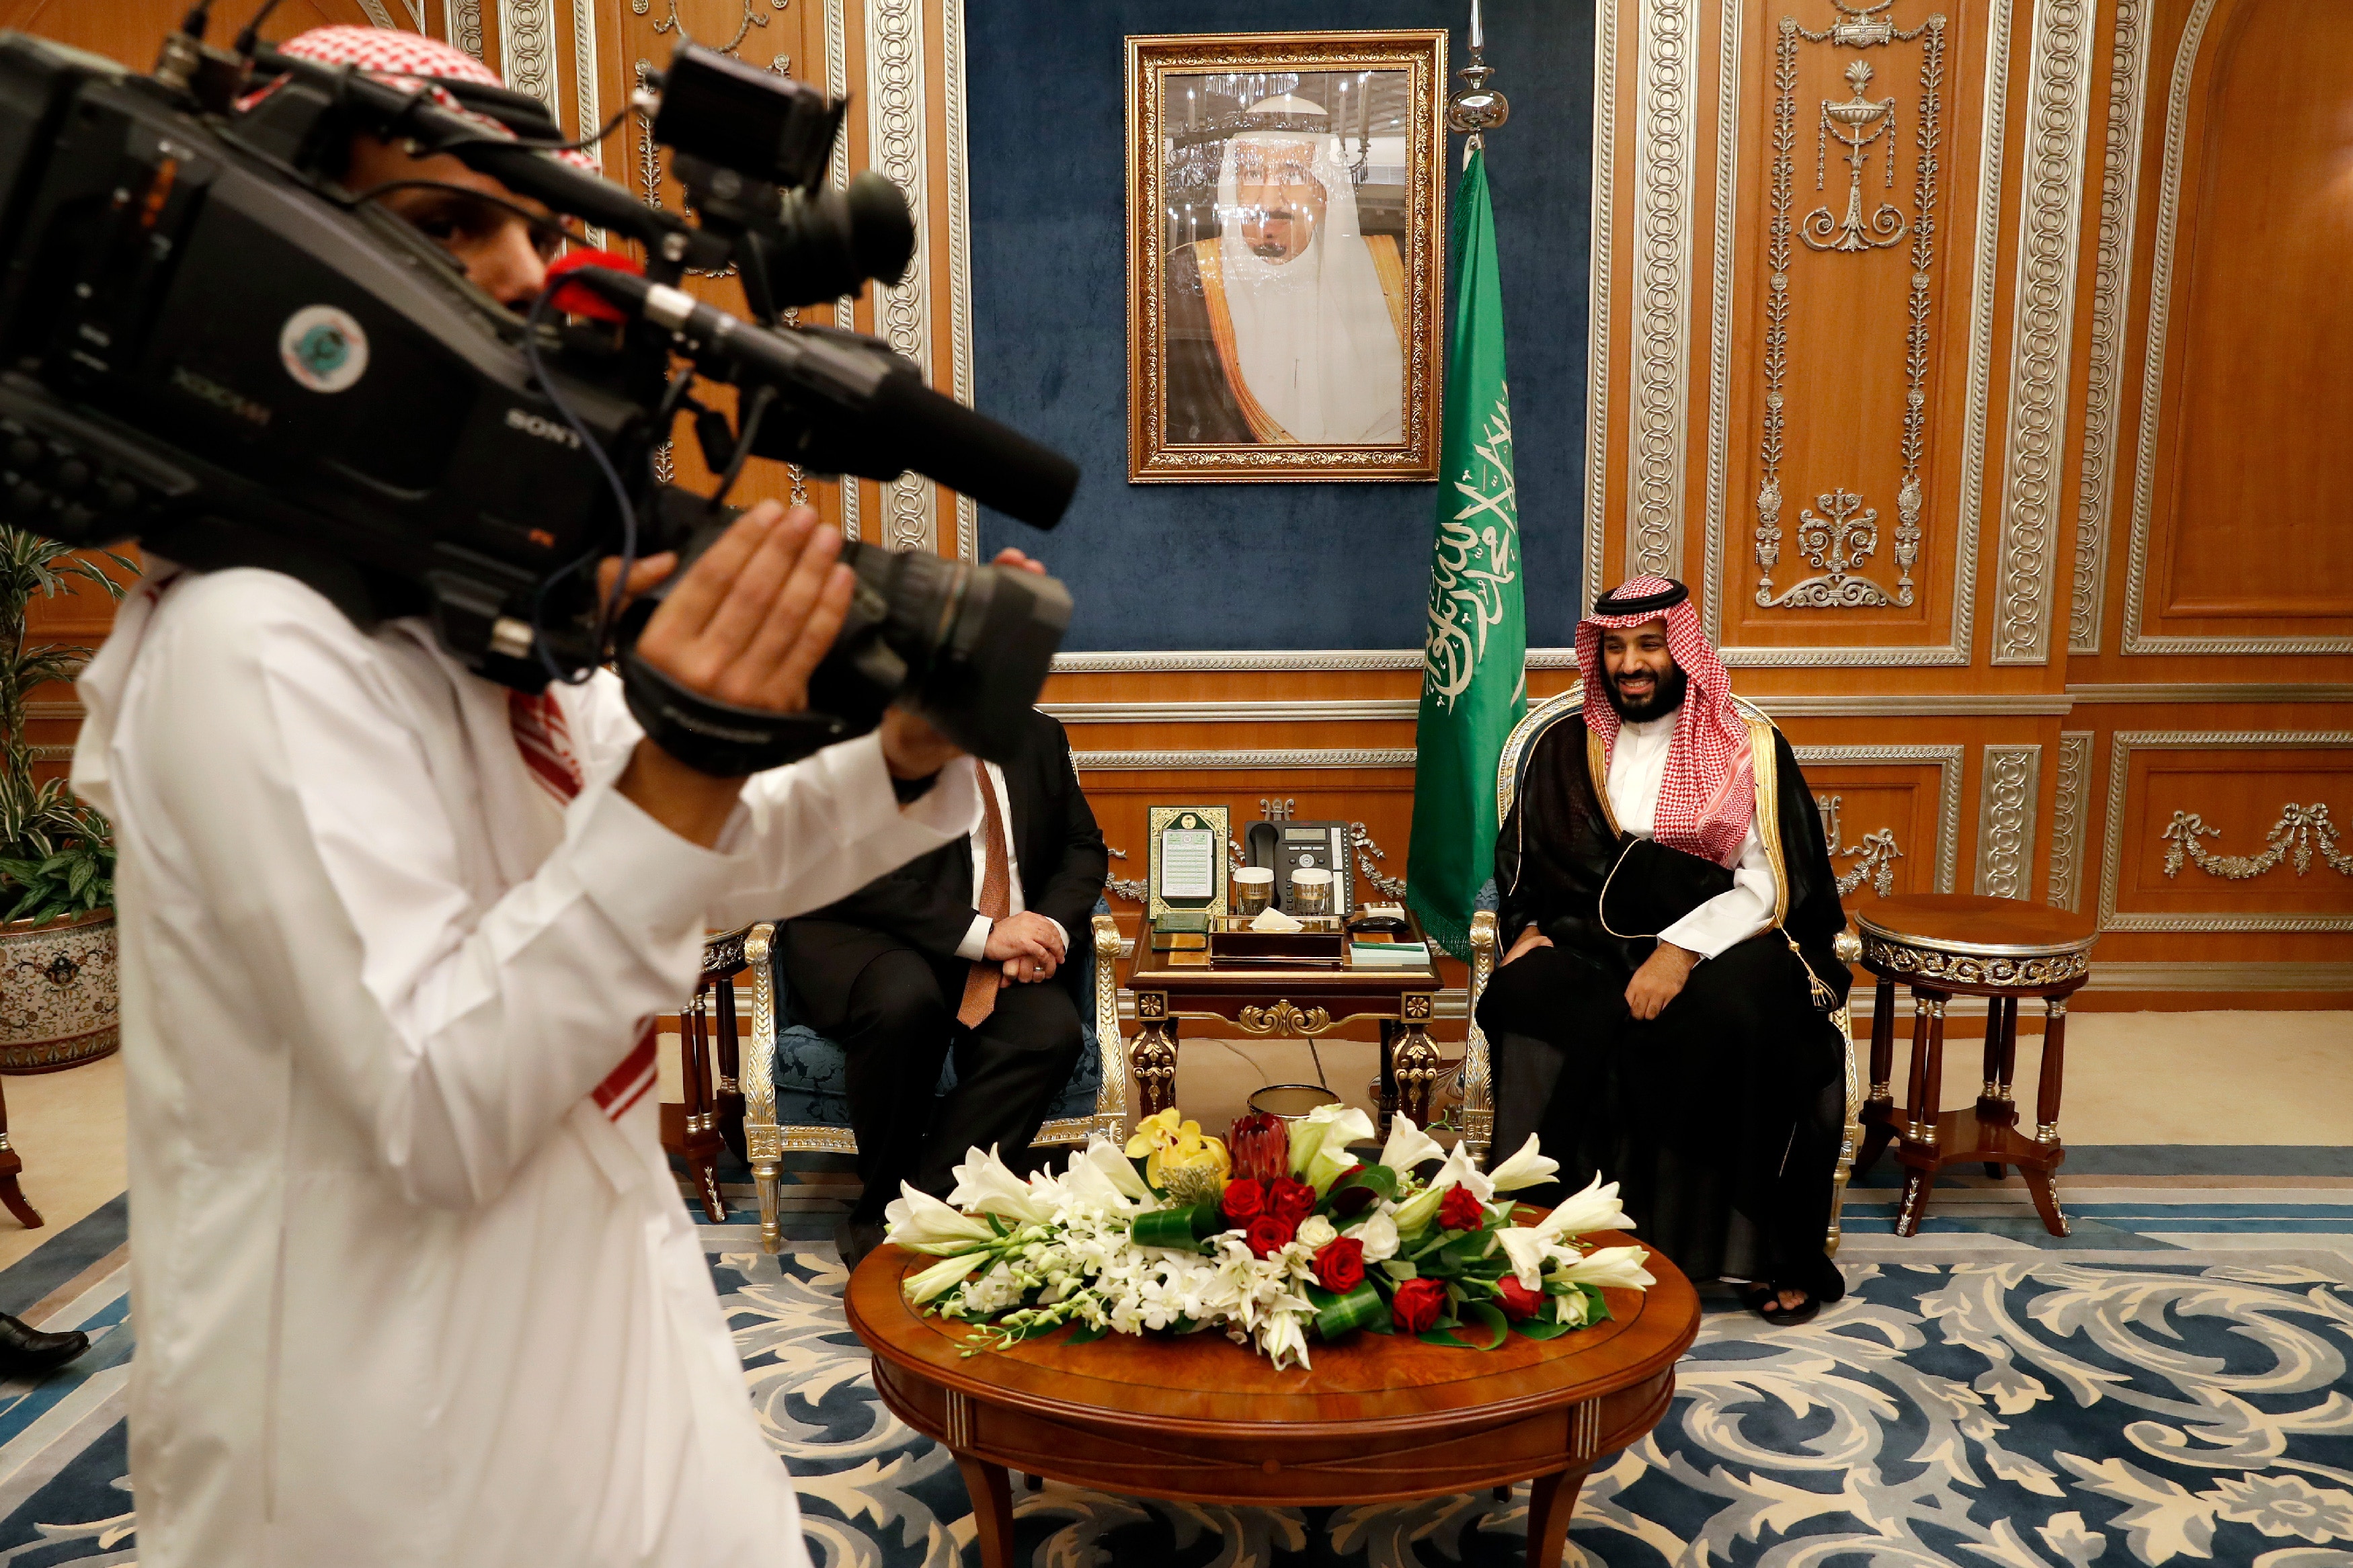 A cameraman gets into position as U.S. Secretary of State Mike Pompeo meets with Saudi Crown Prince Mohammed bin Salman, in Riyadh, Saudi Arabia, Tuesday Oct. 16, 2018. Pompeo also met on Tuesday with Saudi King Salman over the disappearance and alleged slaying of Saudi writer Jamal Khashoggi, who vanished two weeks ago during a visit to the Saudi Consulate in Istanbul. (Leah Millis/Pool via AP)